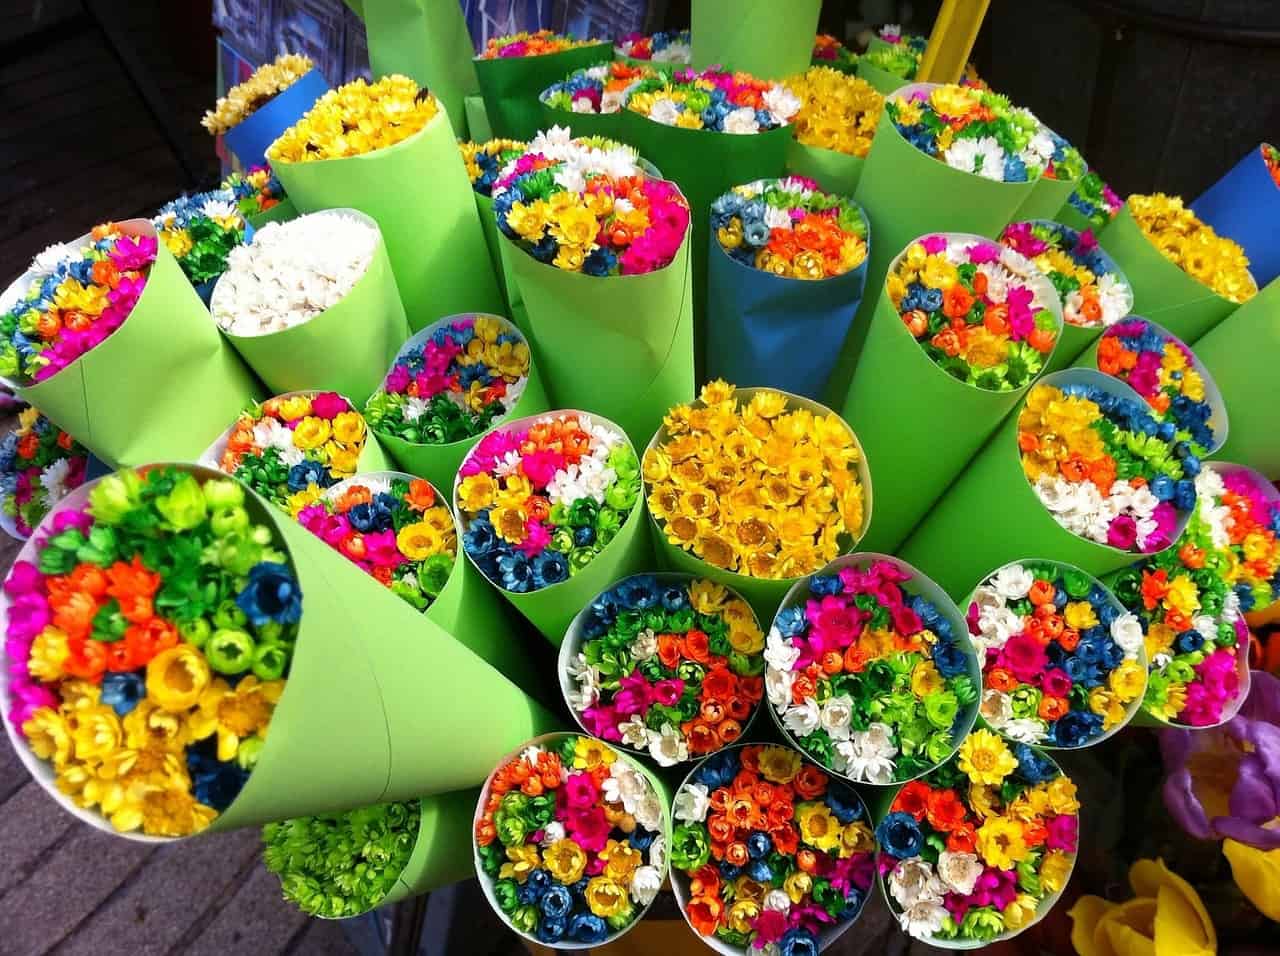 Grab some flowers at a flower stall in Barcelona during spring! Image source: Pixabay user Nadine Laplante.